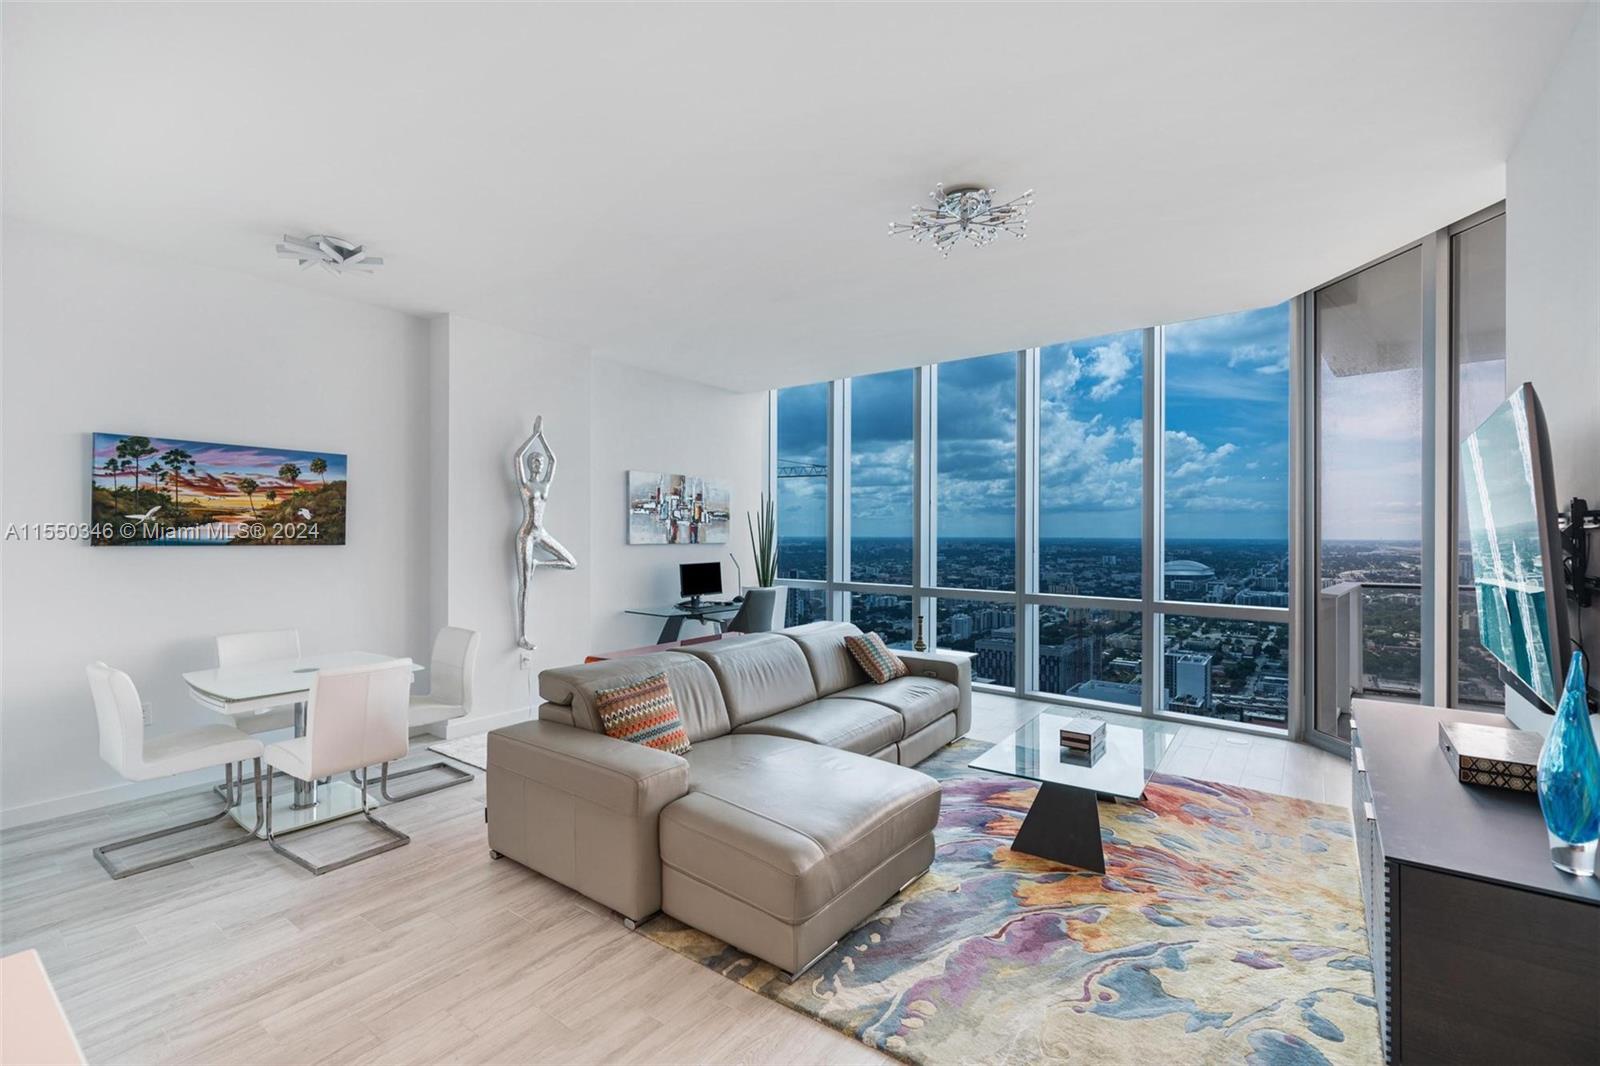 Welcome to the absolute largest 2bed/2bath condo 1,366 sq ft with stunning water, city & skyline views in all of Paramount Miami. This one of a kind unit has the a huge wide living room in the entire  as well as rare extra high vaulted ceilings. Additional features include: smart house technology system, wood porcelain tile flooring, electronic blinds in both living & bedroom, custom closets, private laundry room area, extra wide terrace, high end chef kitchen including Sub Zero and Bosch appliances, marble backsplash, Italcraft cabinets, huge master bathroom with double vanity sinks, separate soaking tub and stand up shower and much more. Have access to world class amenities including and restaurants steps away.